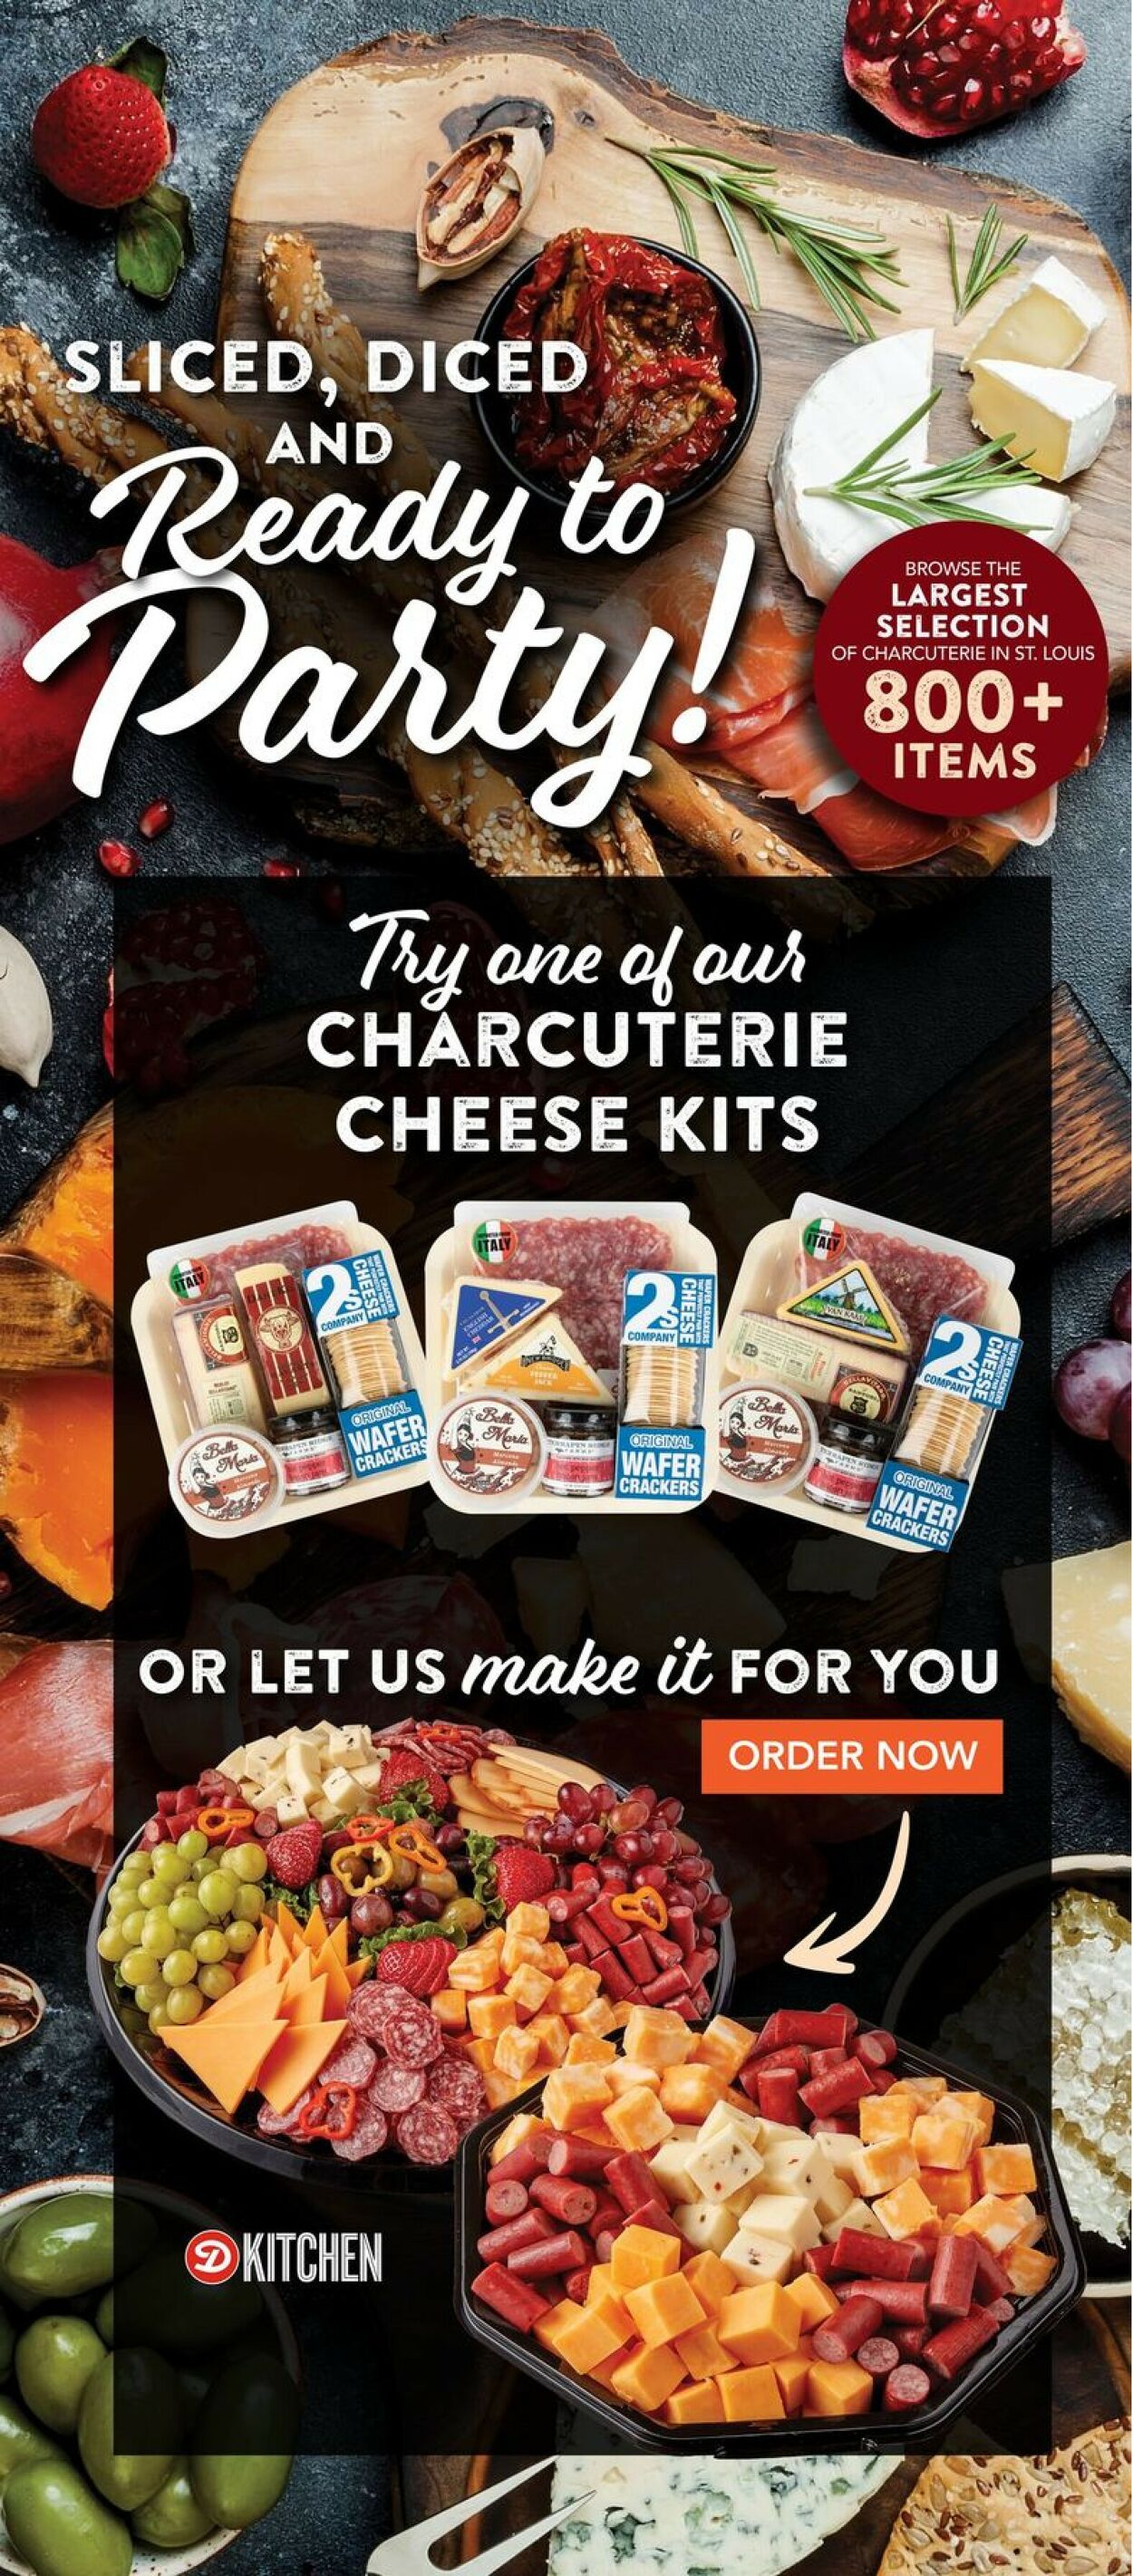 Dierbergs Ad from 12/13/2022